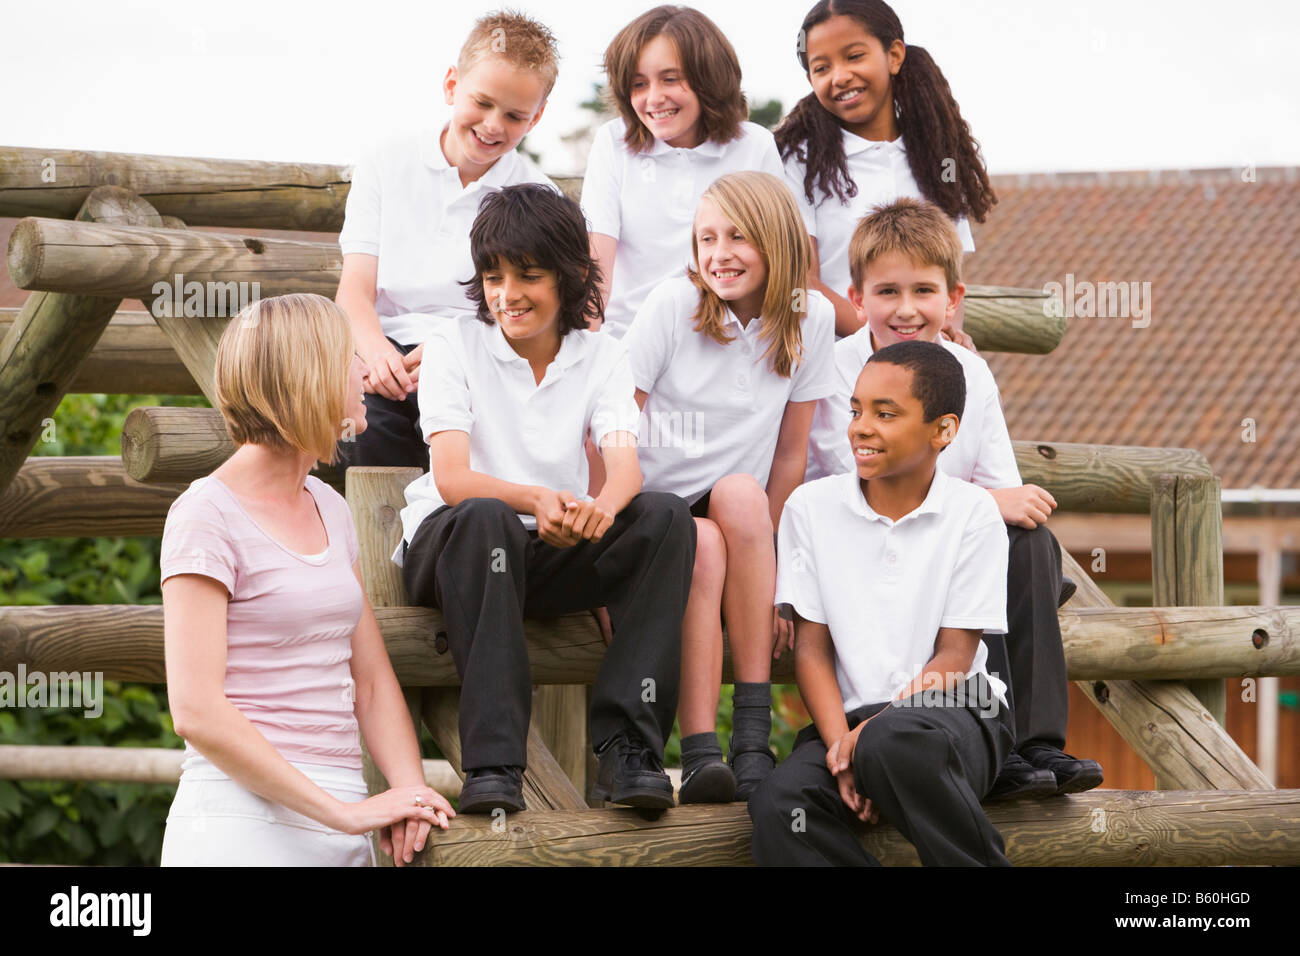 Seven students sitting on wooden structure with teacher standing beside them Stock Photo